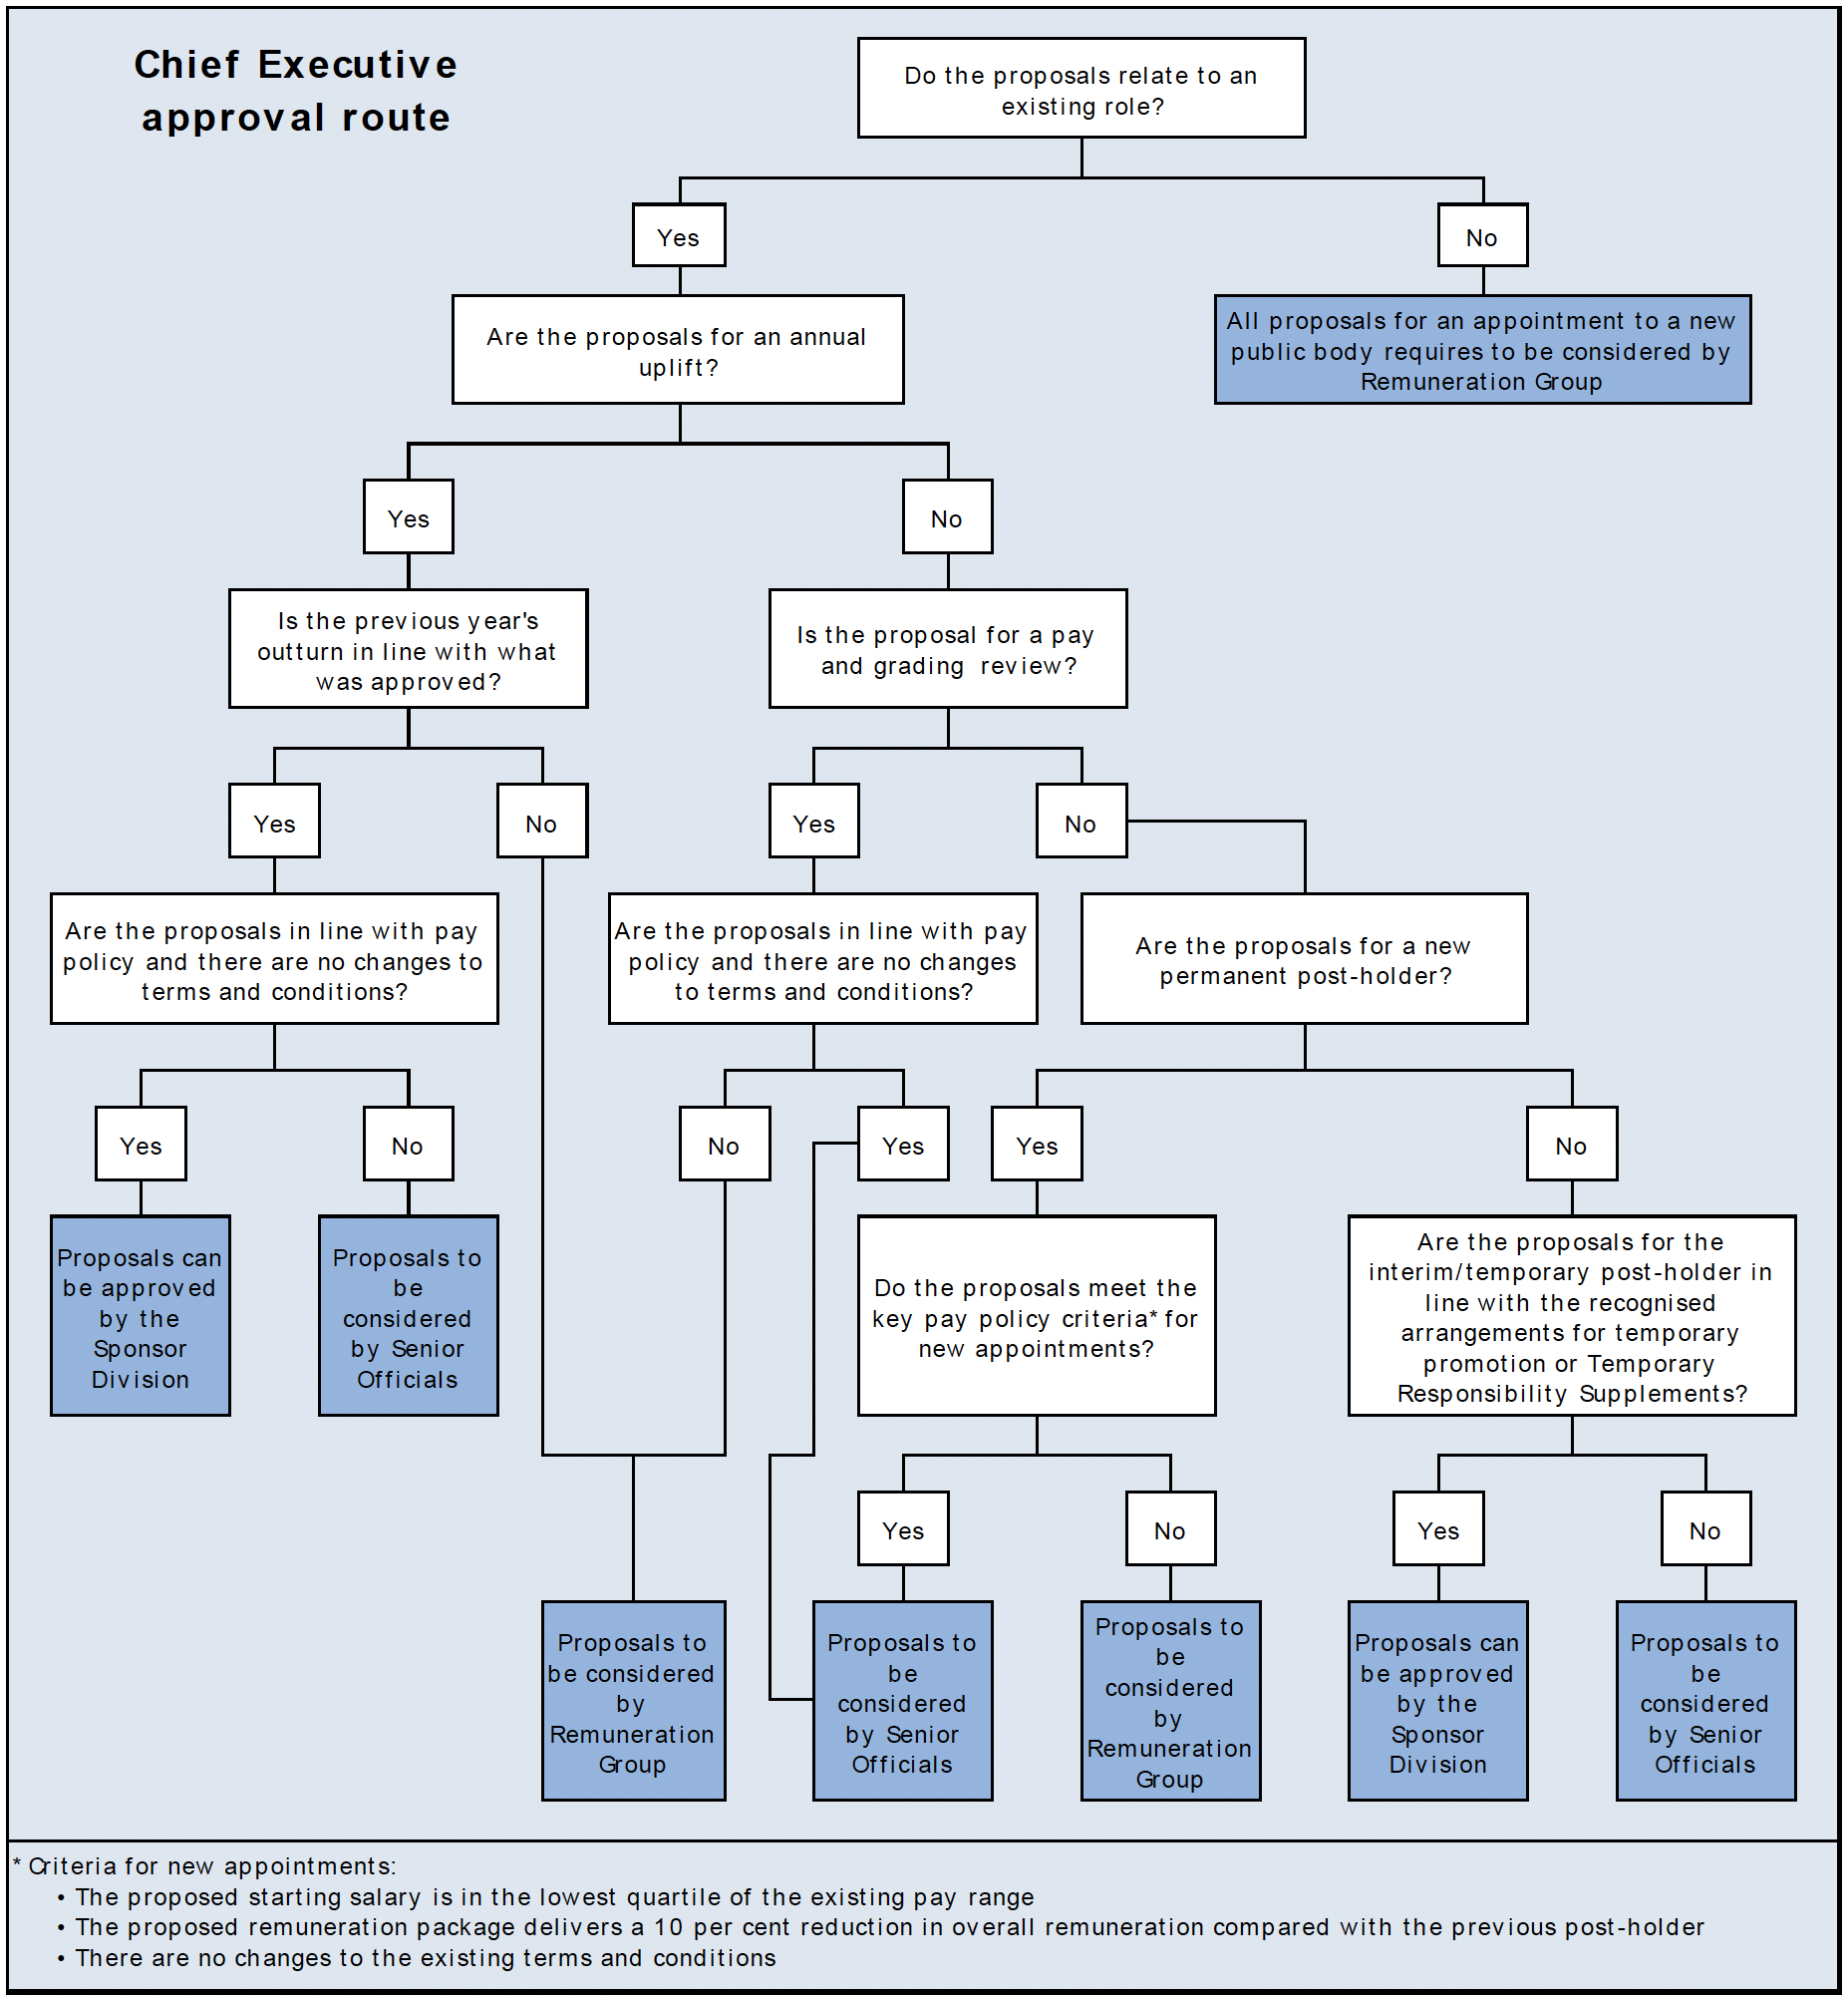 Flowchart setting out the approvals process for Chief Executive's pay proposals. 